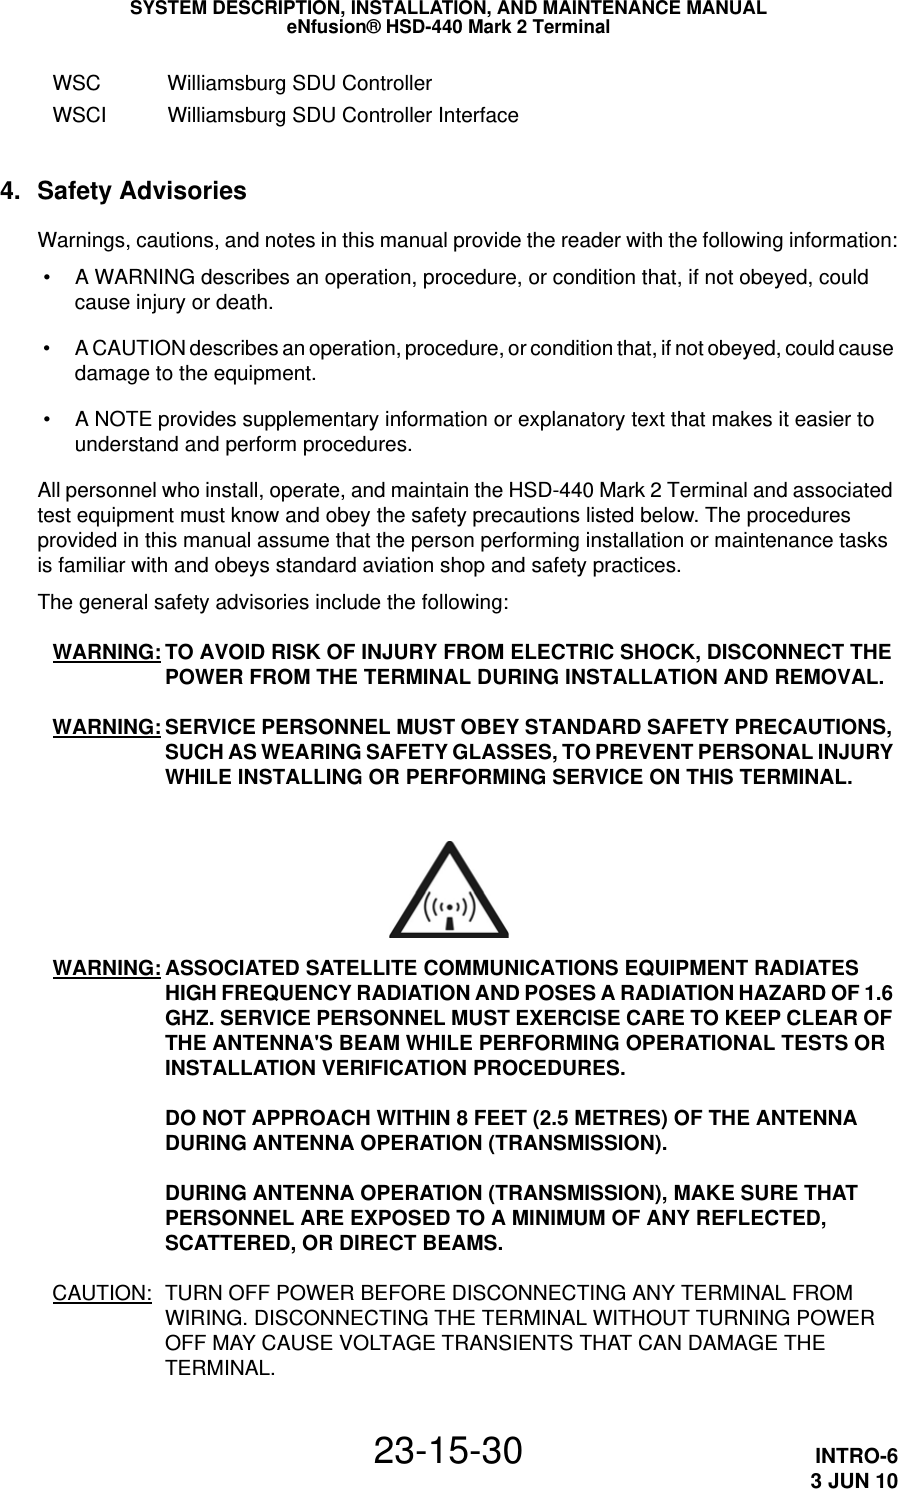 SYSTEM DESCRIPTION, INSTALLATION, AND MAINTENANCE MANUALeNfusion® HSD-440 Mark 2 Terminal23-15-30 INTRO-63 JUN 10WSC Williamsburg SDU ControllerWSCI Williamsburg SDU Controller Interface4. Safety AdvisoriesWarnings, cautions, and notes in this manual provide the reader with the following information: • A WARNING describes an operation, procedure, or condition that, if not obeyed, could cause injury or death. • A CAUTION describes an operation, procedure, or condition that, if not obeyed, could cause damage to the equipment. • A NOTE provides supplementary information or explanatory text that makes it easier to understand and perform procedures.All personnel who install, operate, and maintain the HSD-440 Mark 2 Terminal and associated test equipment must know and obey the safety precautions listed below. The procedures provided in this manual assume that the person performing installation or maintenance tasks is familiar with and obeys standard aviation shop and safety practices.The general safety advisories include the following:WARNING: TO AVOID RISK OF INJURY FROM ELECTRIC SHOCK, DISCONNECT THE POWER FROM THE TERMINAL DURING INSTALLATION AND REMOVAL. WARNING: SERVICE PERSONNEL MUST OBEY STANDARD SAFETY PRECAUTIONS, SUCH AS WEARING SAFETY GLASSES, TO PREVENT PERSONAL INJURY WHILE INSTALLING OR PERFORMING SERVICE ON THIS TERMINAL.WARNING: ASSOCIATED SATELLITE COMMUNICATIONS EQUIPMENT RADIATES HIGH FREQUENCY RADIATION AND POSES A RADIATION HAZARD OF 1.6 GHZ. SERVICE PERSONNEL MUST EXERCISE CARE TO KEEP CLEAR OF THE ANTENNA&apos;S BEAM WHILE PERFORMING OPERATIONAL TESTS OR INSTALLATION VERIFICATION PROCEDURES.  DO NOT APPROACH WITHIN 8 FEET (2.5 METRES) OF THE ANTENNA DURING ANTENNA OPERATION (TRANSMISSION).  DURING ANTENNA OPERATION (TRANSMISSION), MAKE SURE THAT PERSONNEL ARE EXPOSED TO A MINIMUM OF ANY REFLECTED, SCATTERED, OR DIRECT BEAMS.CAUTION: TURN OFF POWER BEFORE DISCONNECTING ANY TERMINAL FROM WIRING. DISCONNECTING THE TERMINAL WITHOUT TURNING POWER OFF MAY CAUSE VOLTAGE TRANSIENTS THAT CAN DAMAGE THE TERMINAL.